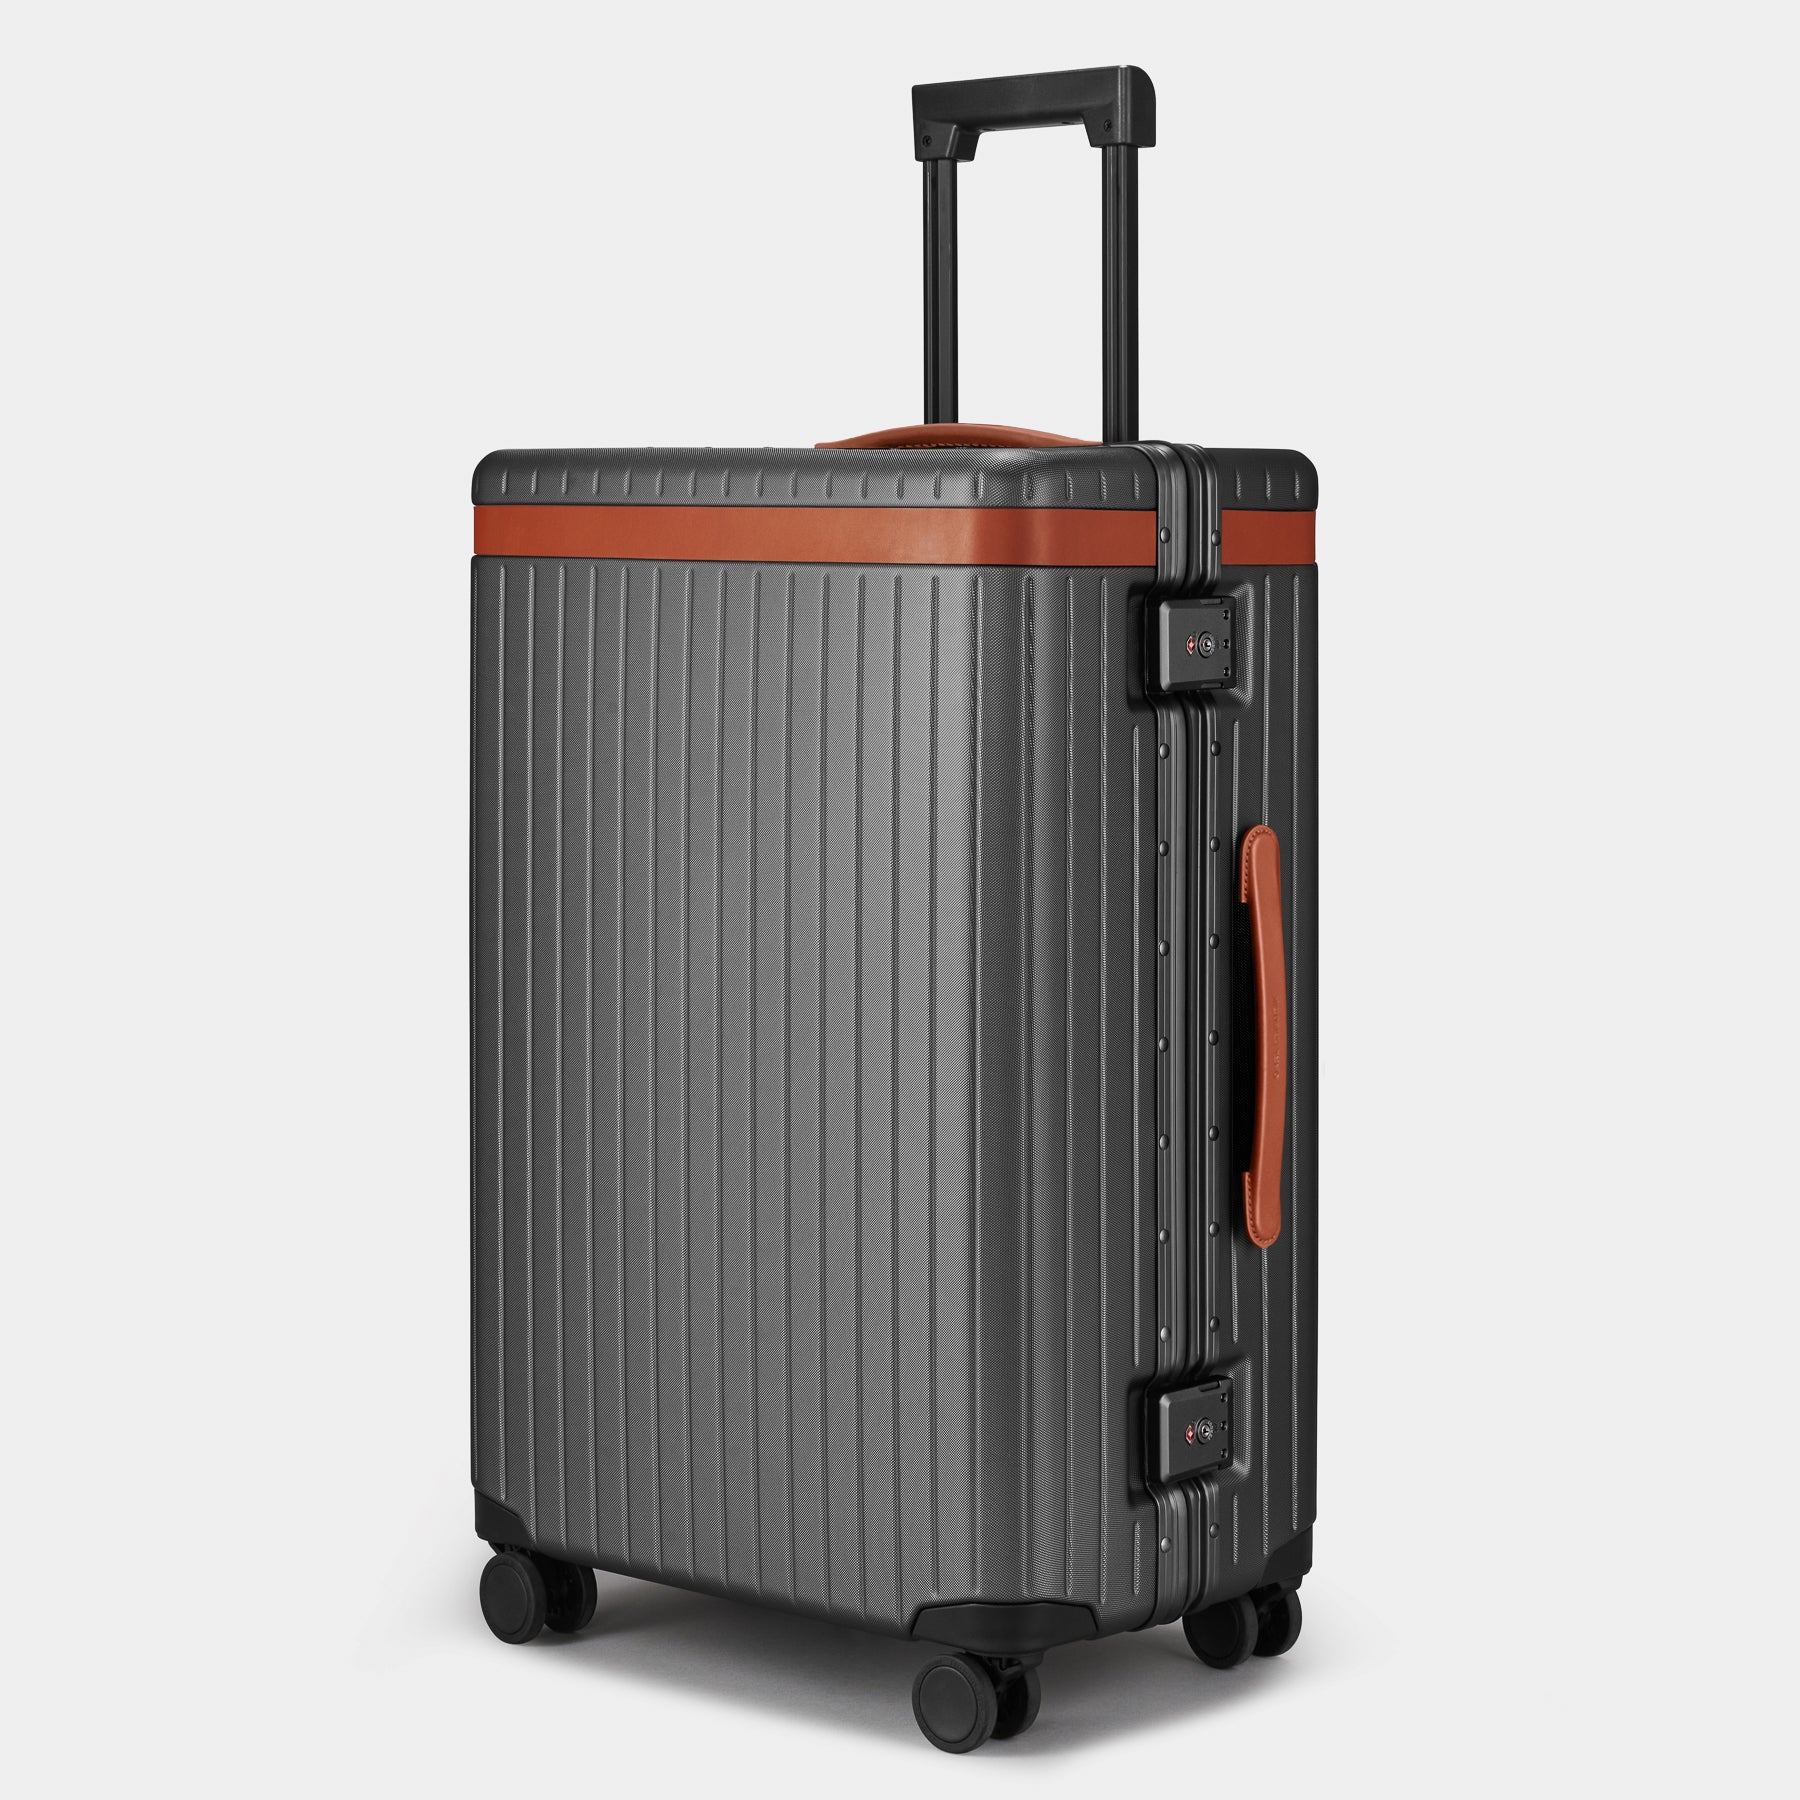 The Check-in - Return Grey / Cognac / Dotted Large grey polycarbonate suitcase - Fair Condition